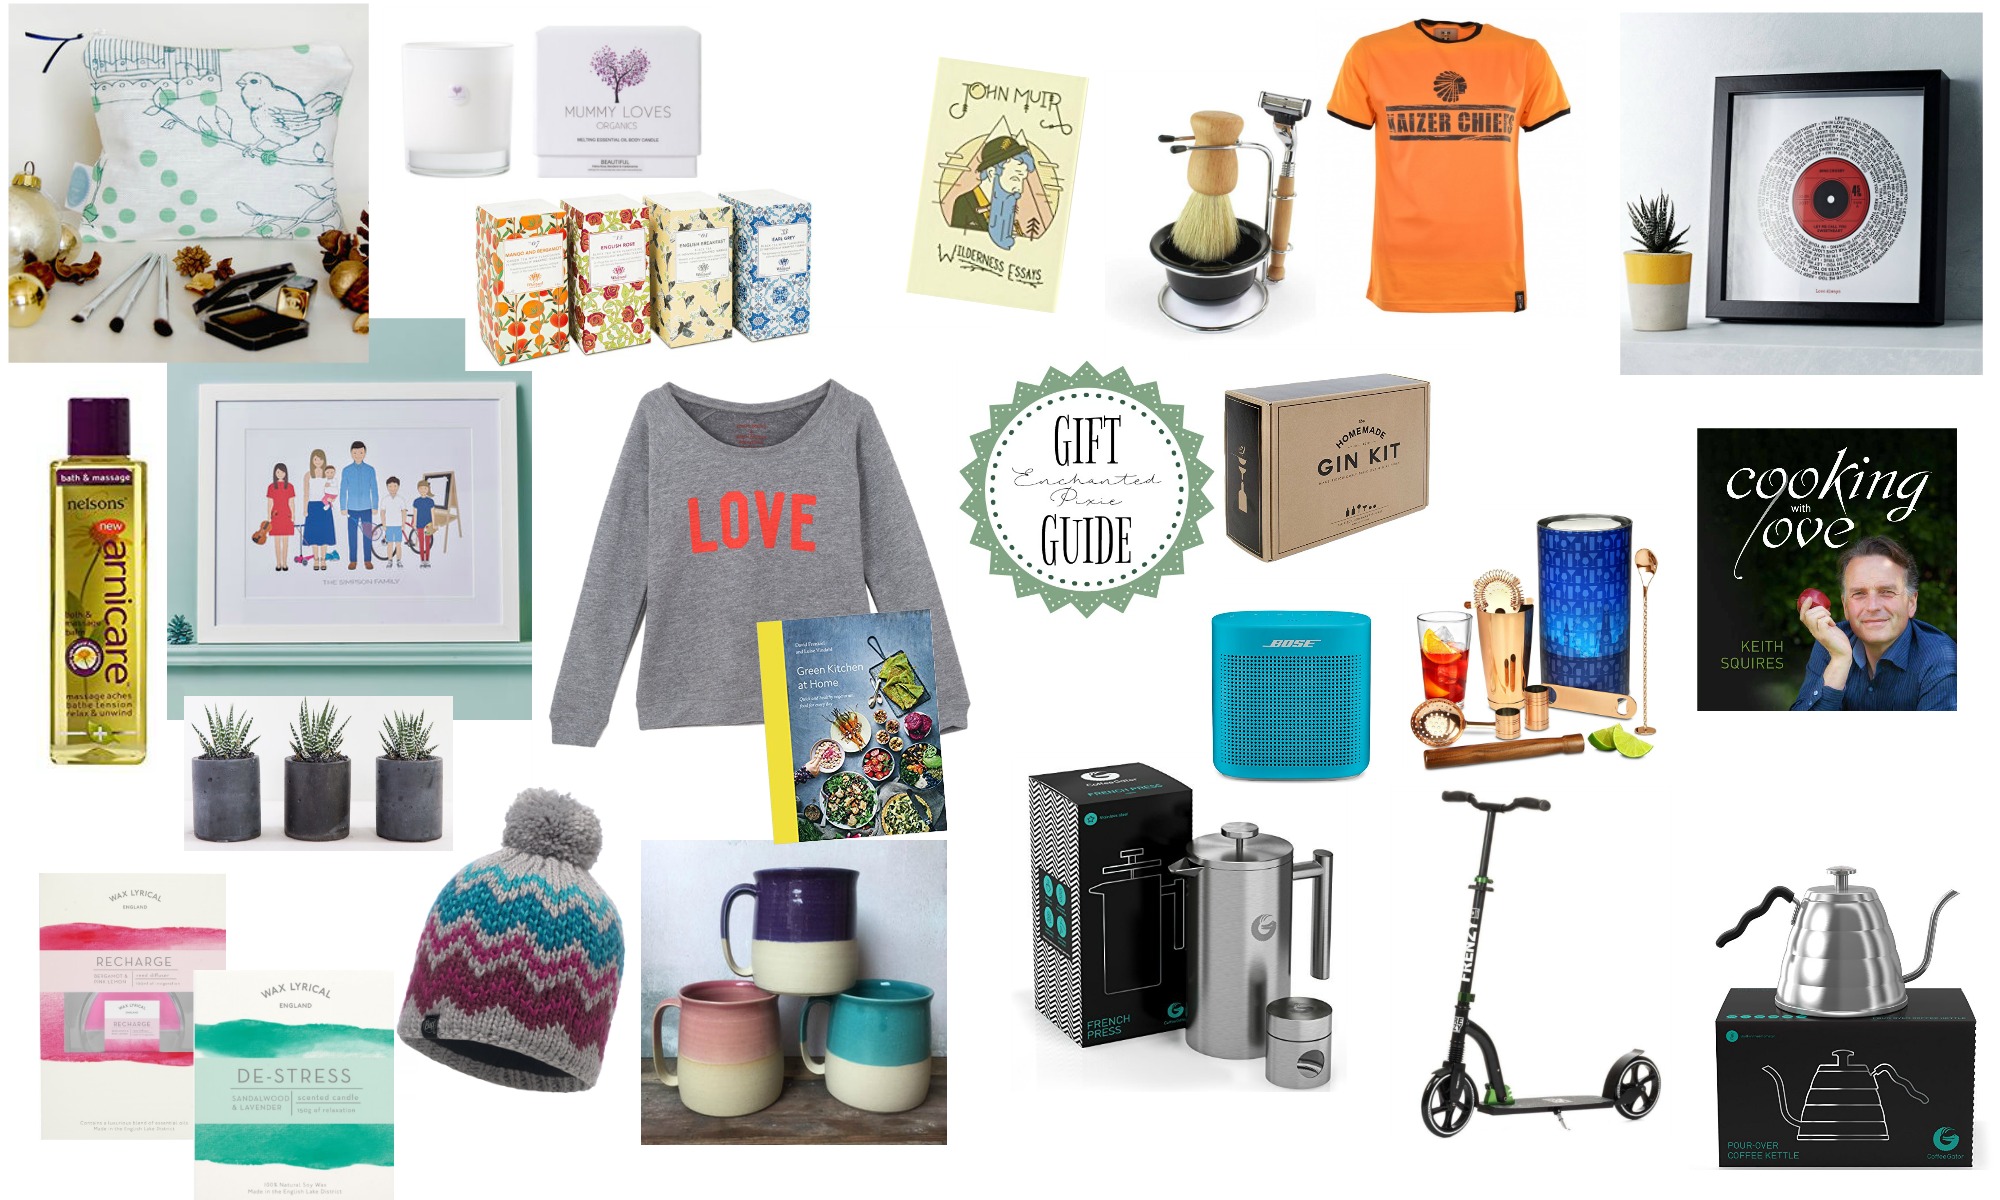 Gift Guide: Her & Him